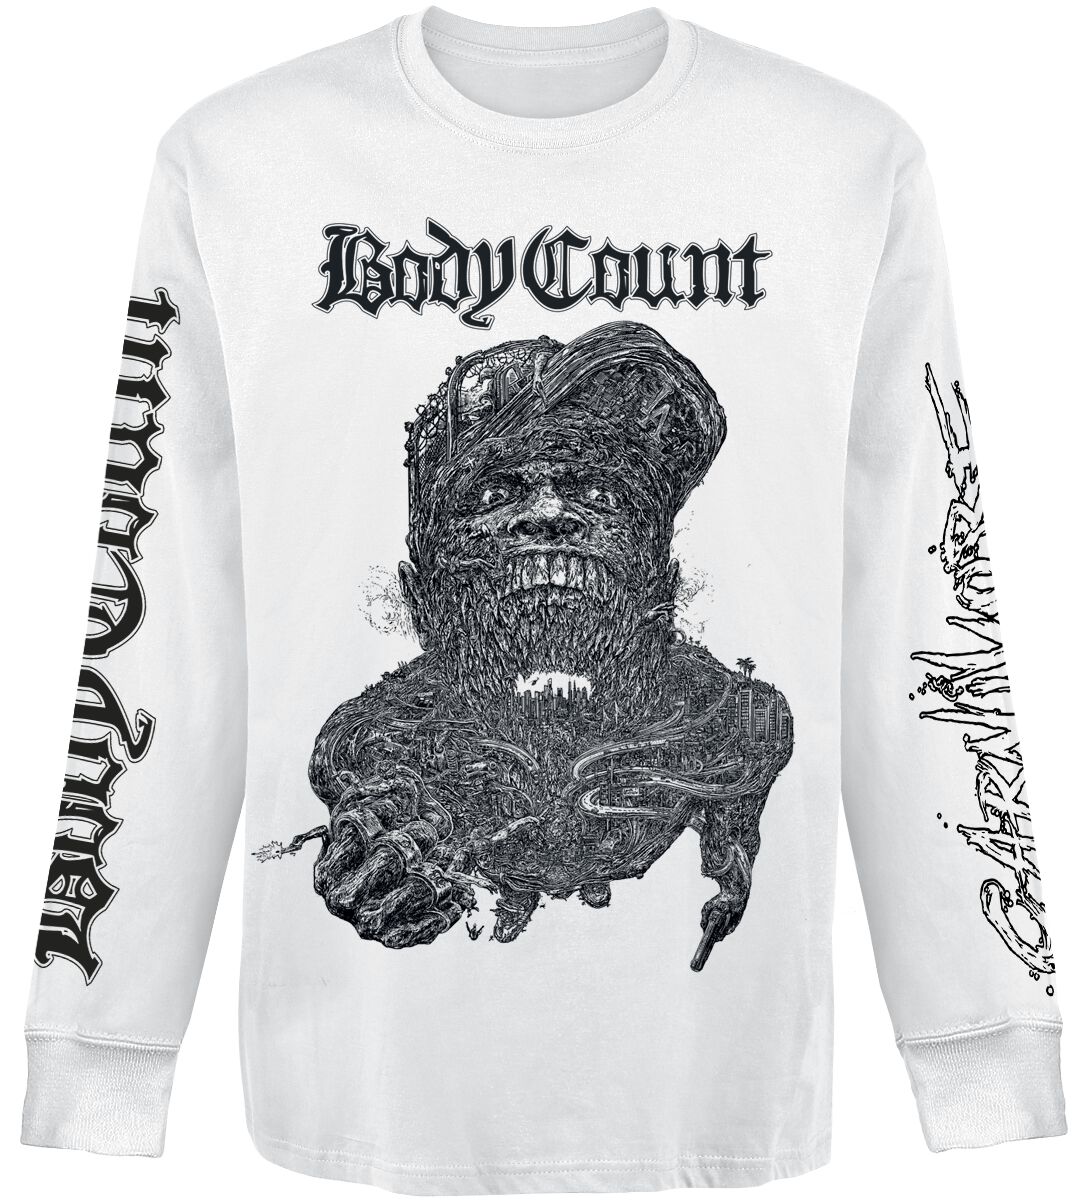 Body Count  Long-sleeve Shirt white